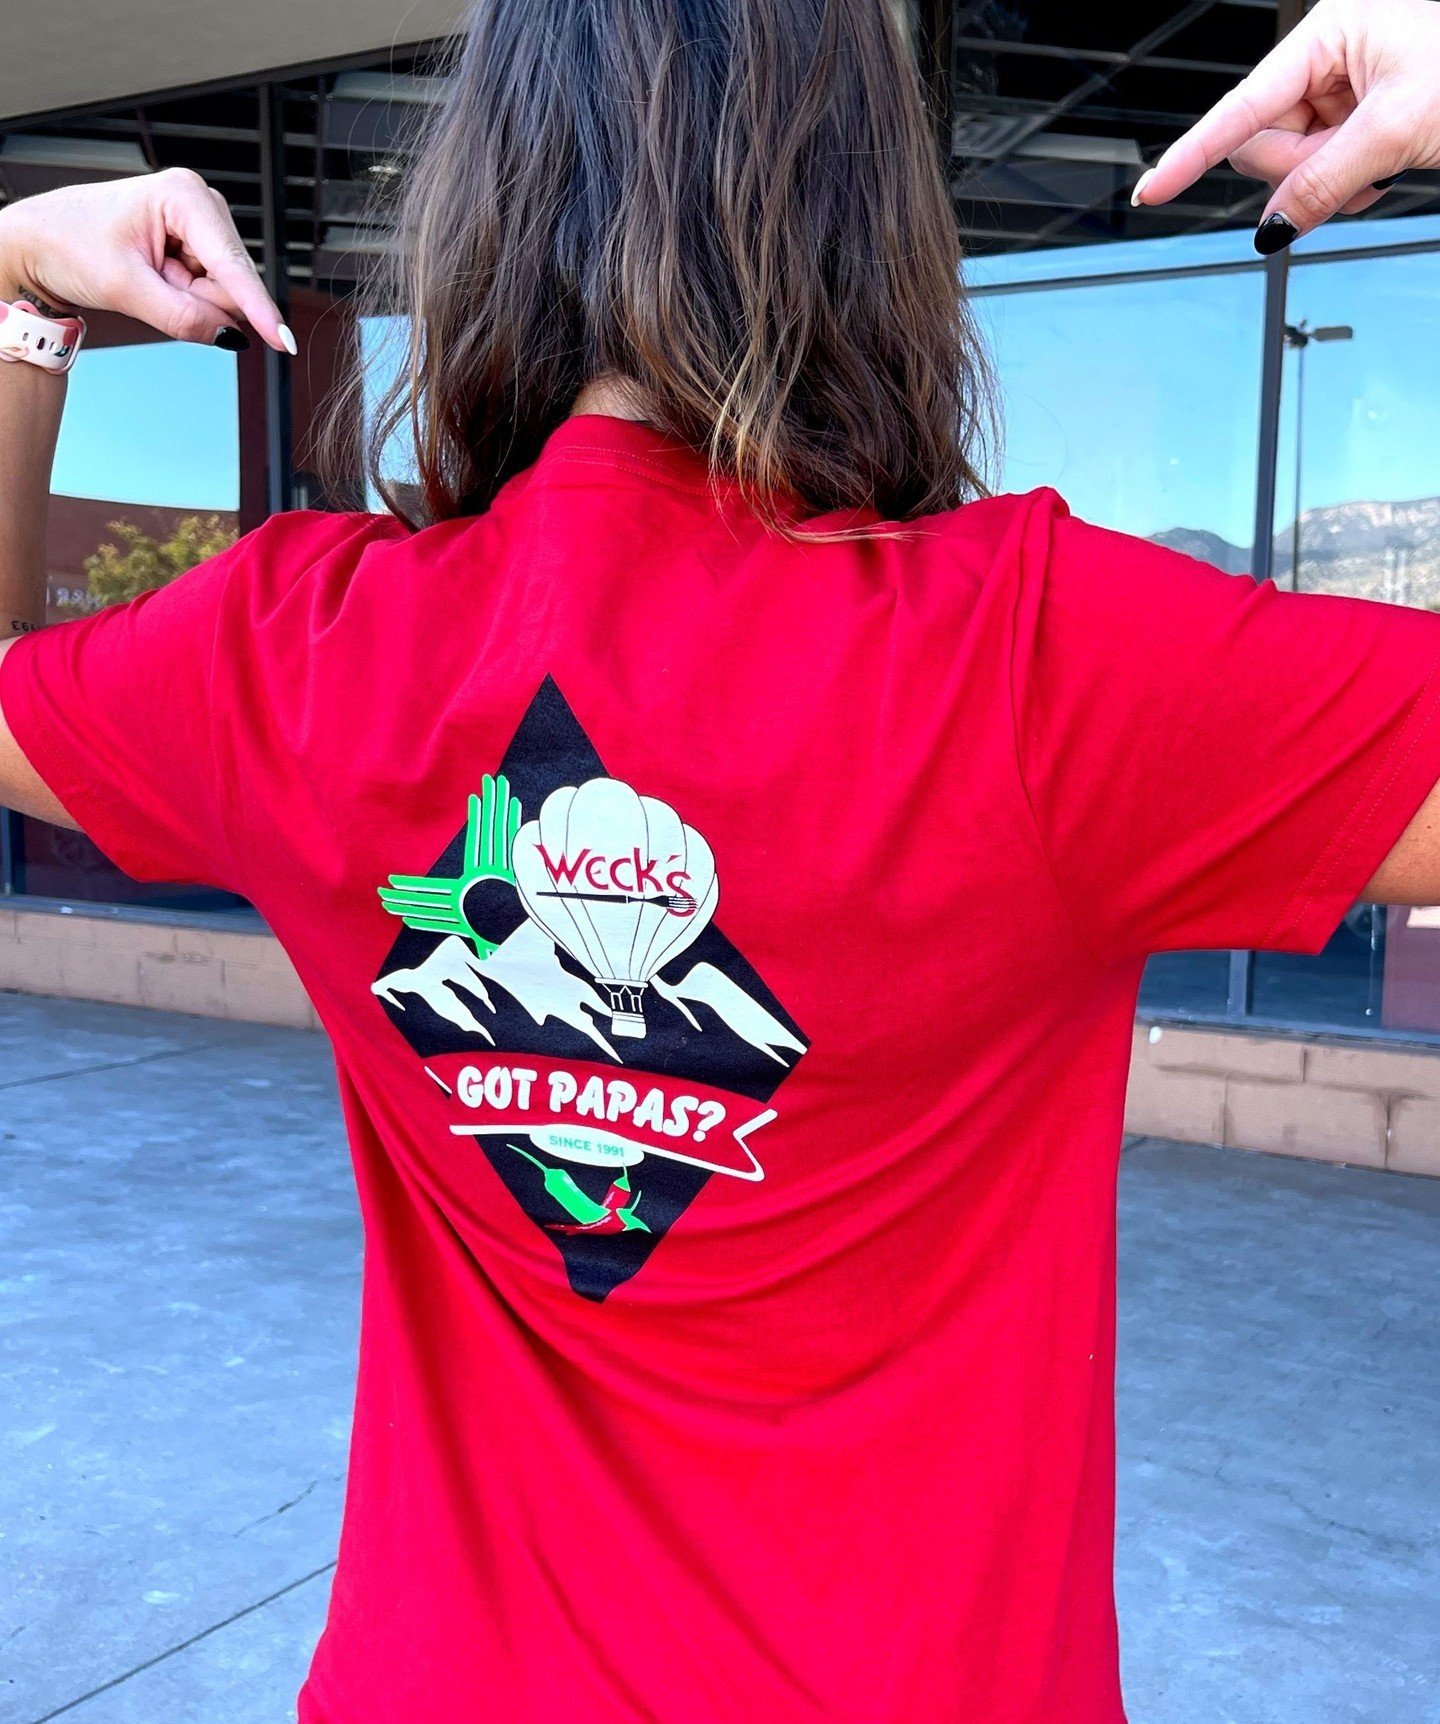 🌶️Who's seen the new Weck's shirts!? If you haven't grabbed one, head into any of our ABQ, Rio Rancho, Los Lunas or Las Cruces locations now! We've got them in black too! #wecks #wecksnm